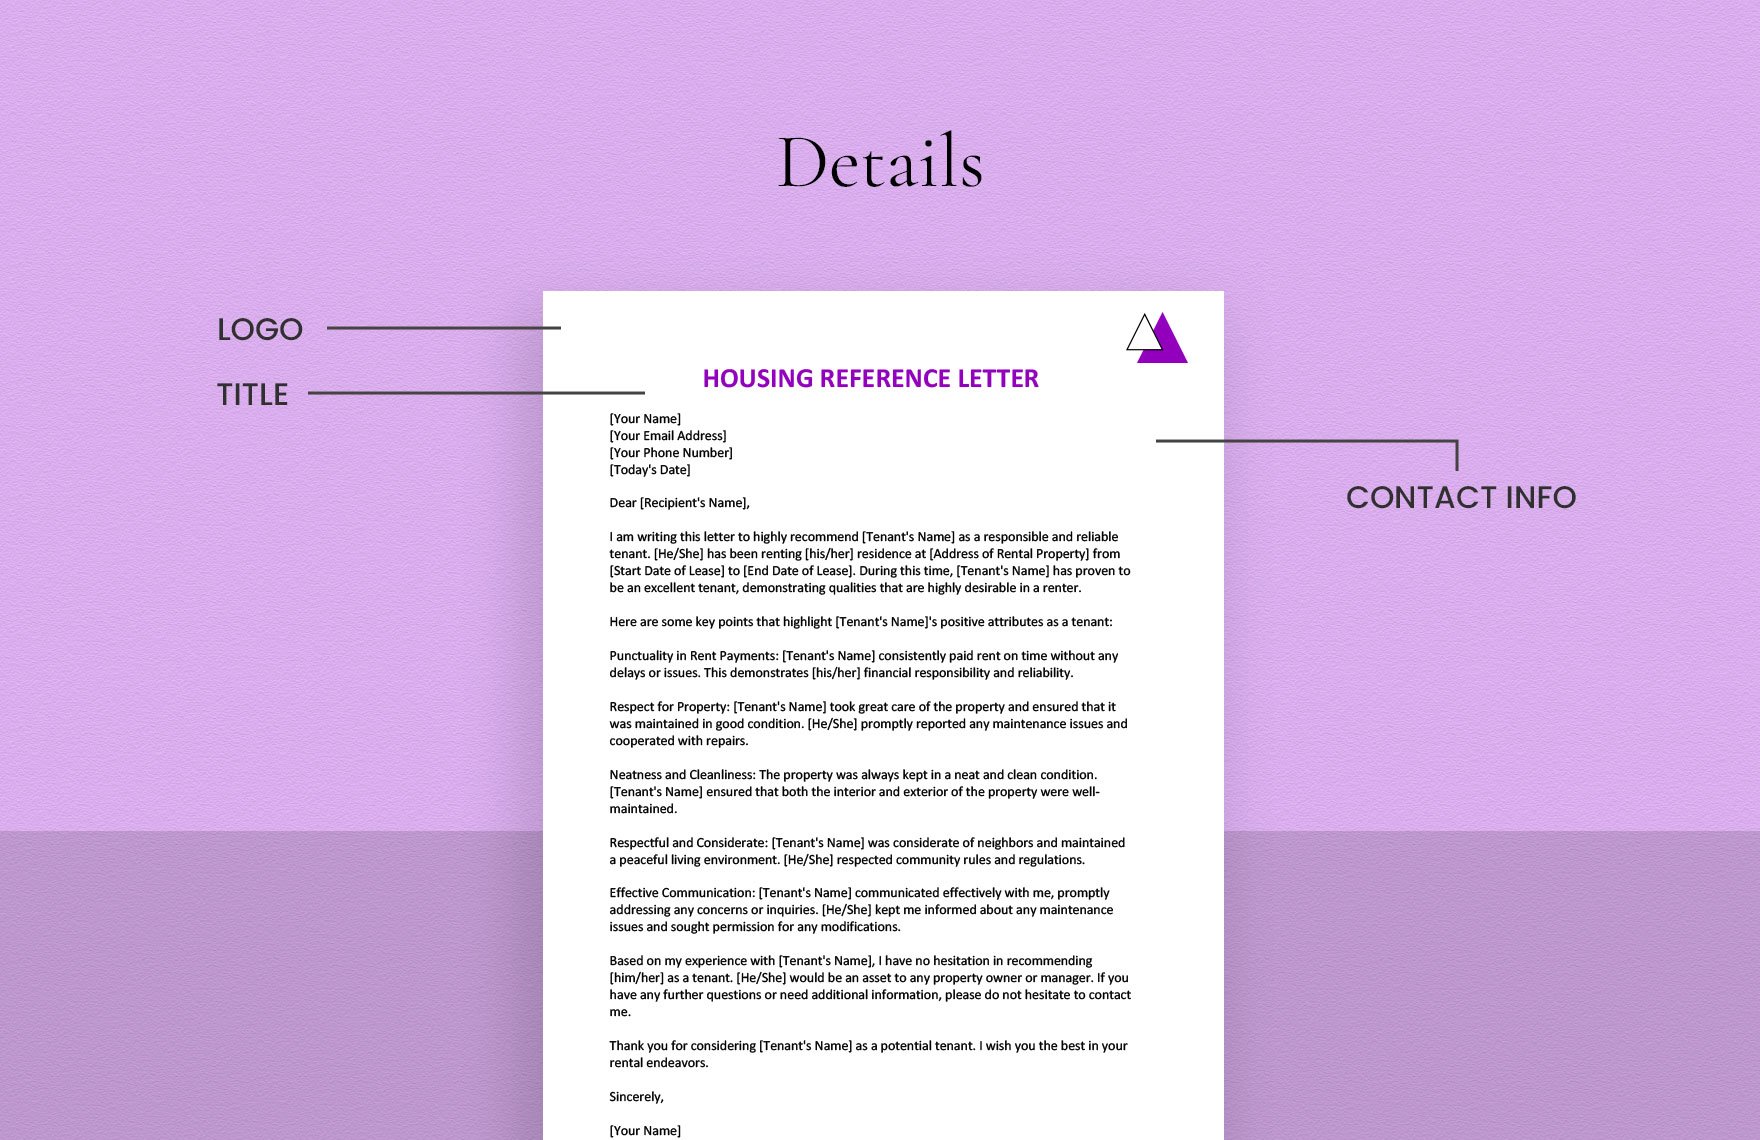 Housing Reference Letter